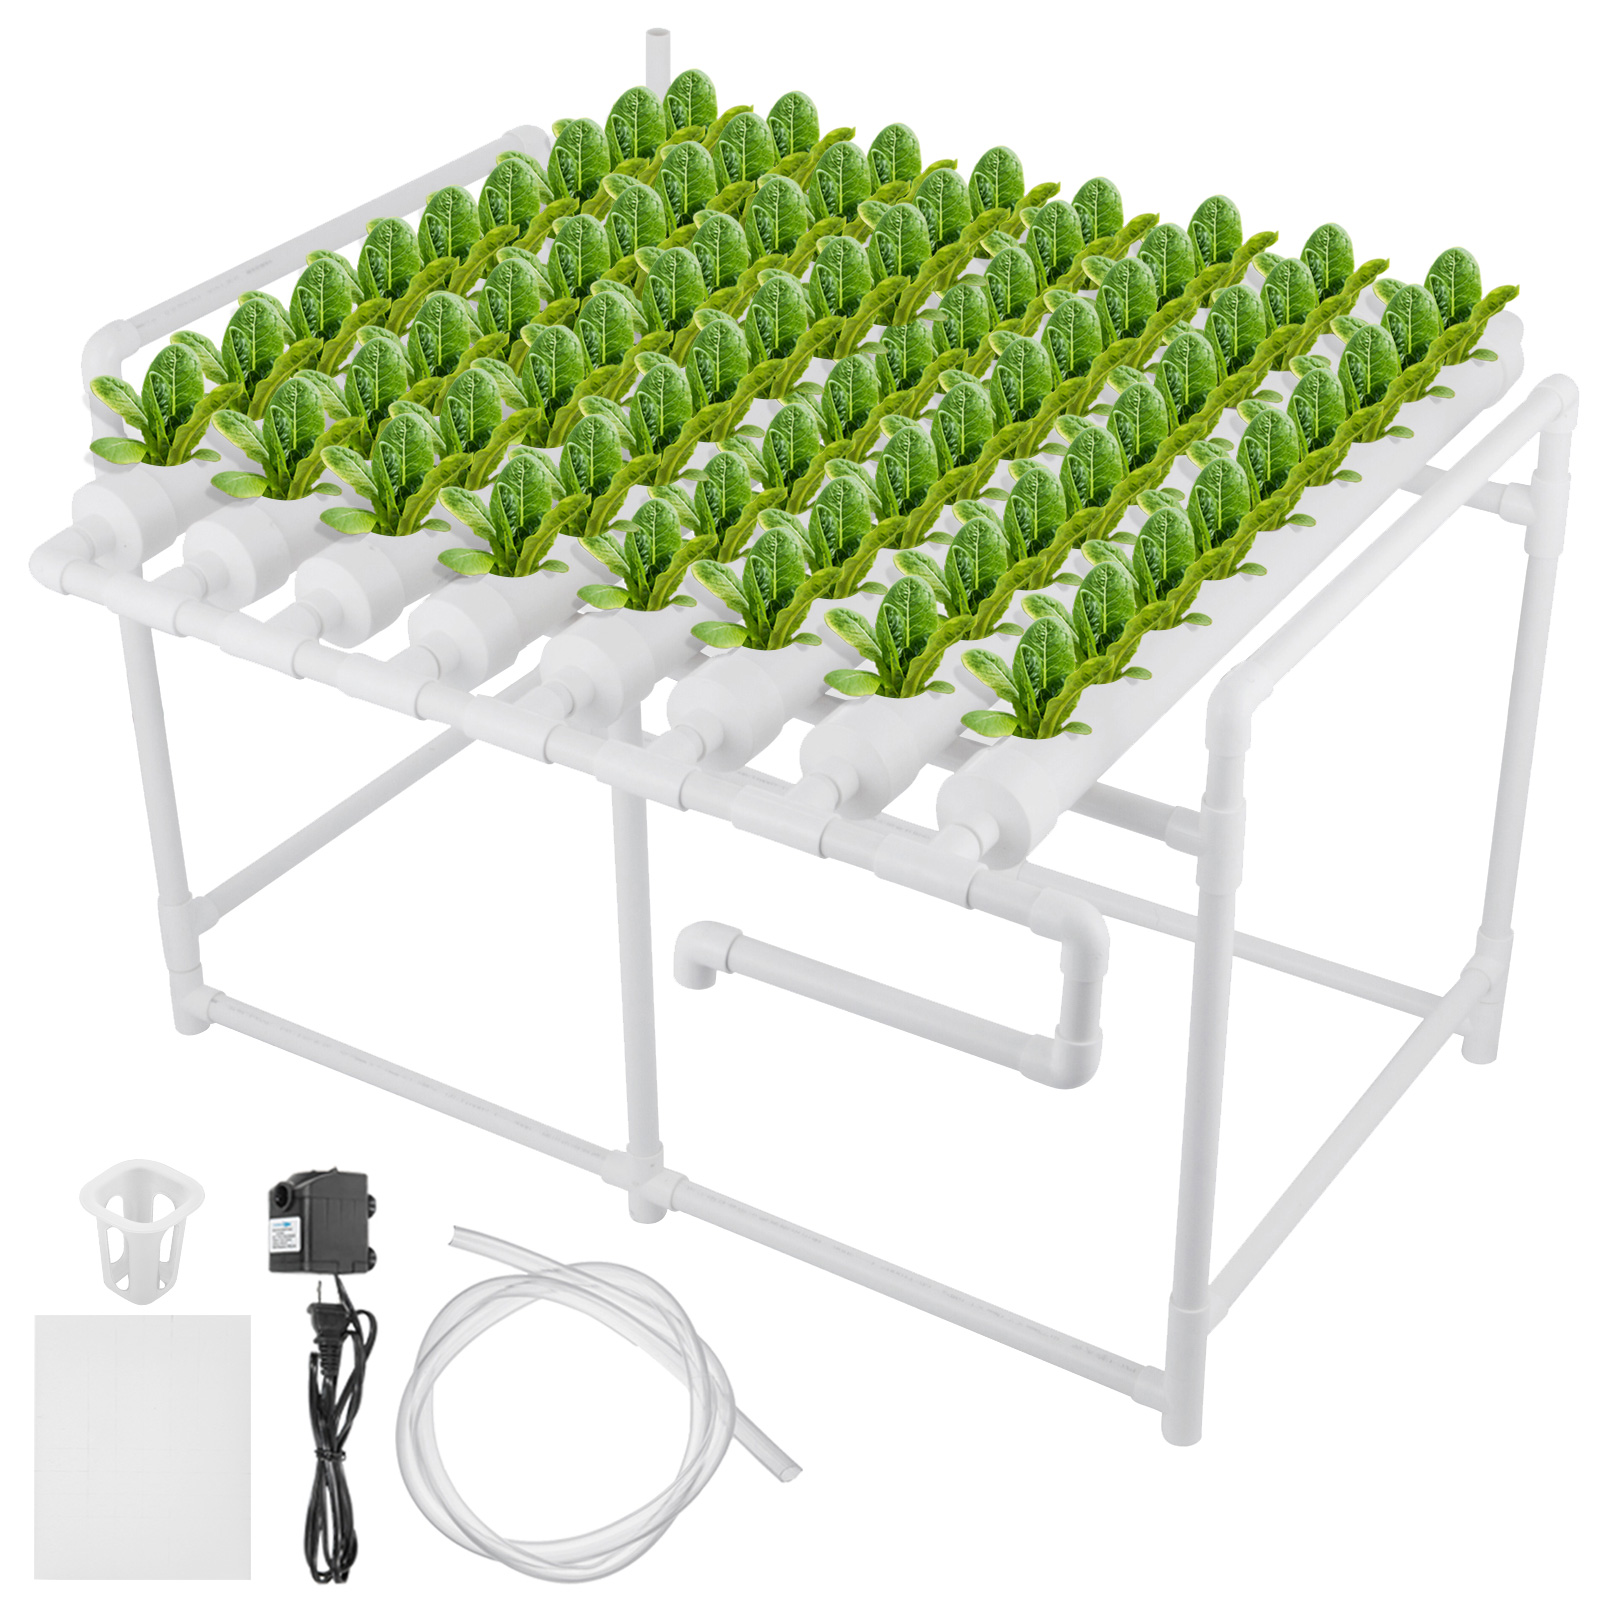 TECHTONGDA Hydroponics 72 Sites Grow Kit Garden Plant System with Nest Basket Water Pump and Sponge 8 Pipes 72 Sites 